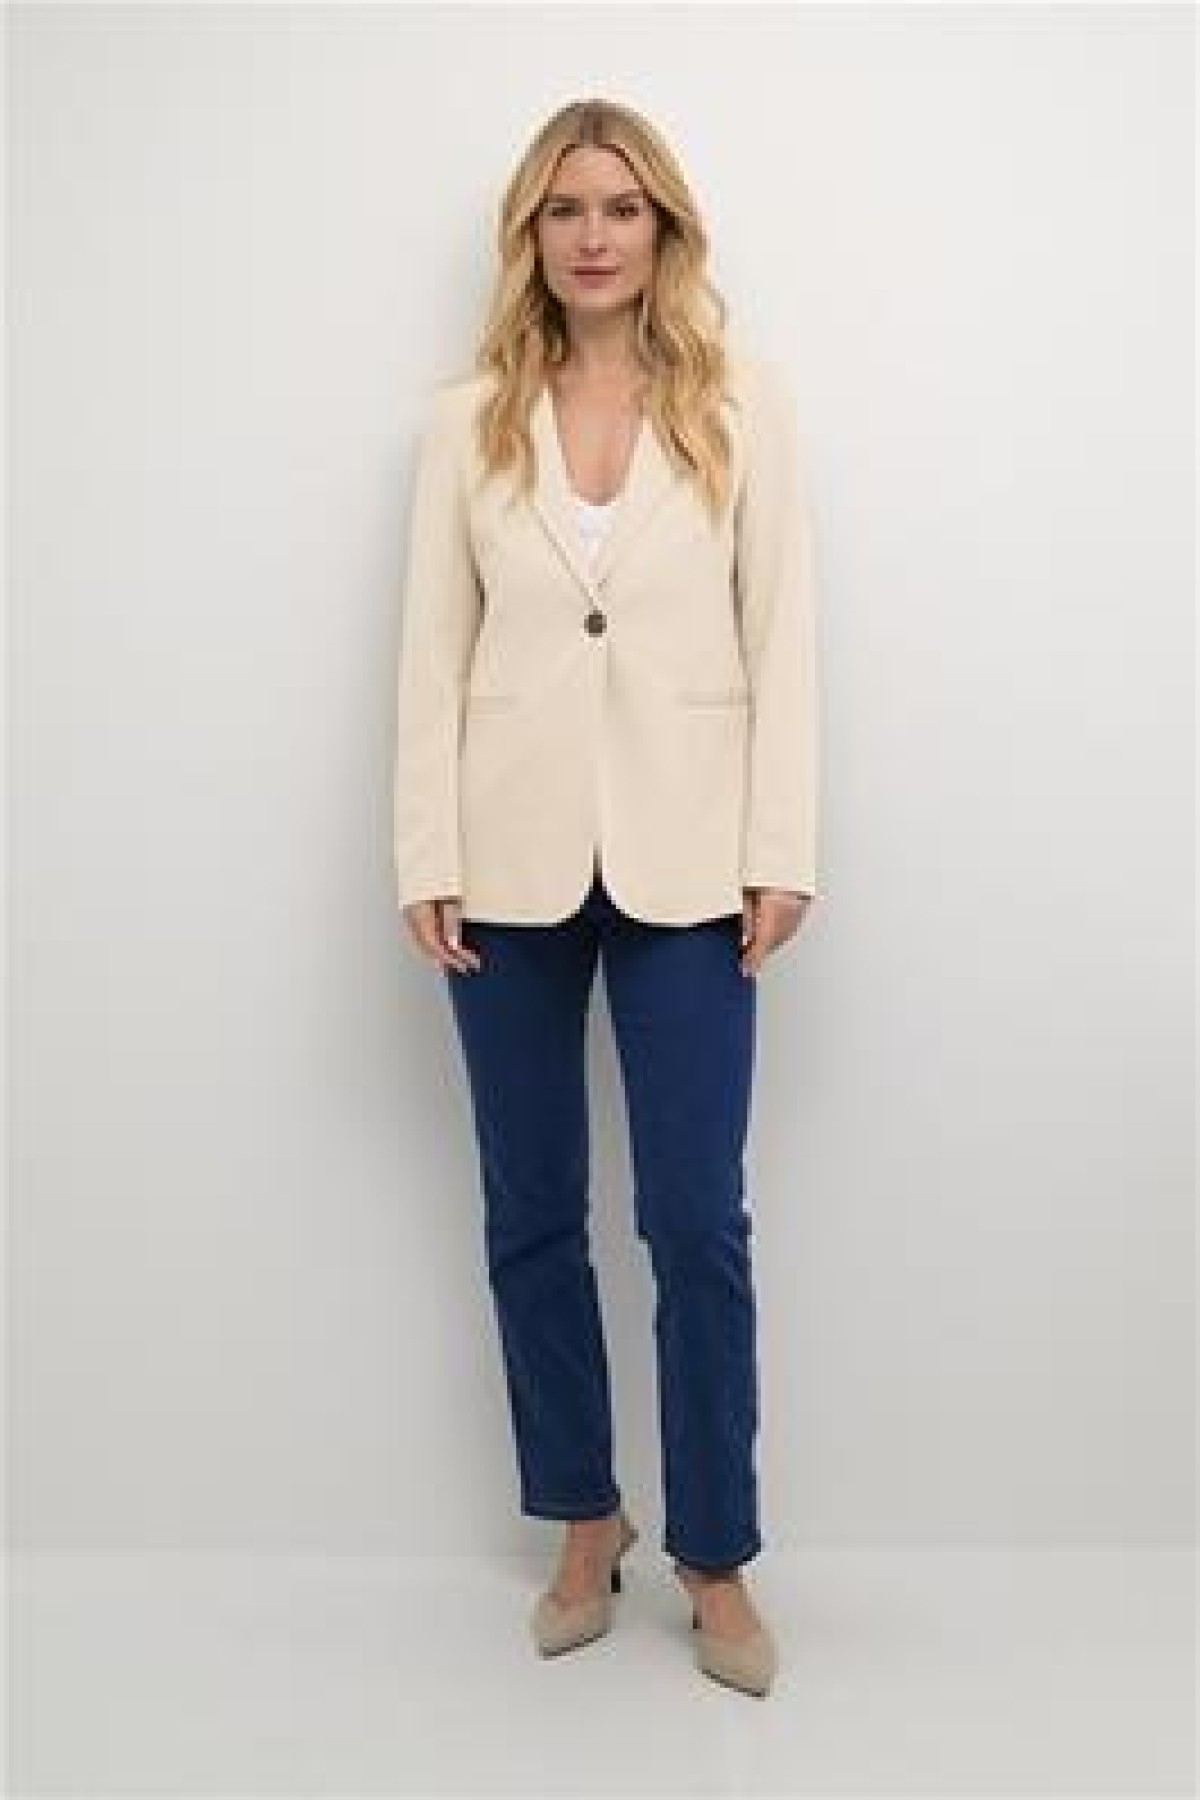 BLAZER / TWO COLORS BLUE AND BEIGE